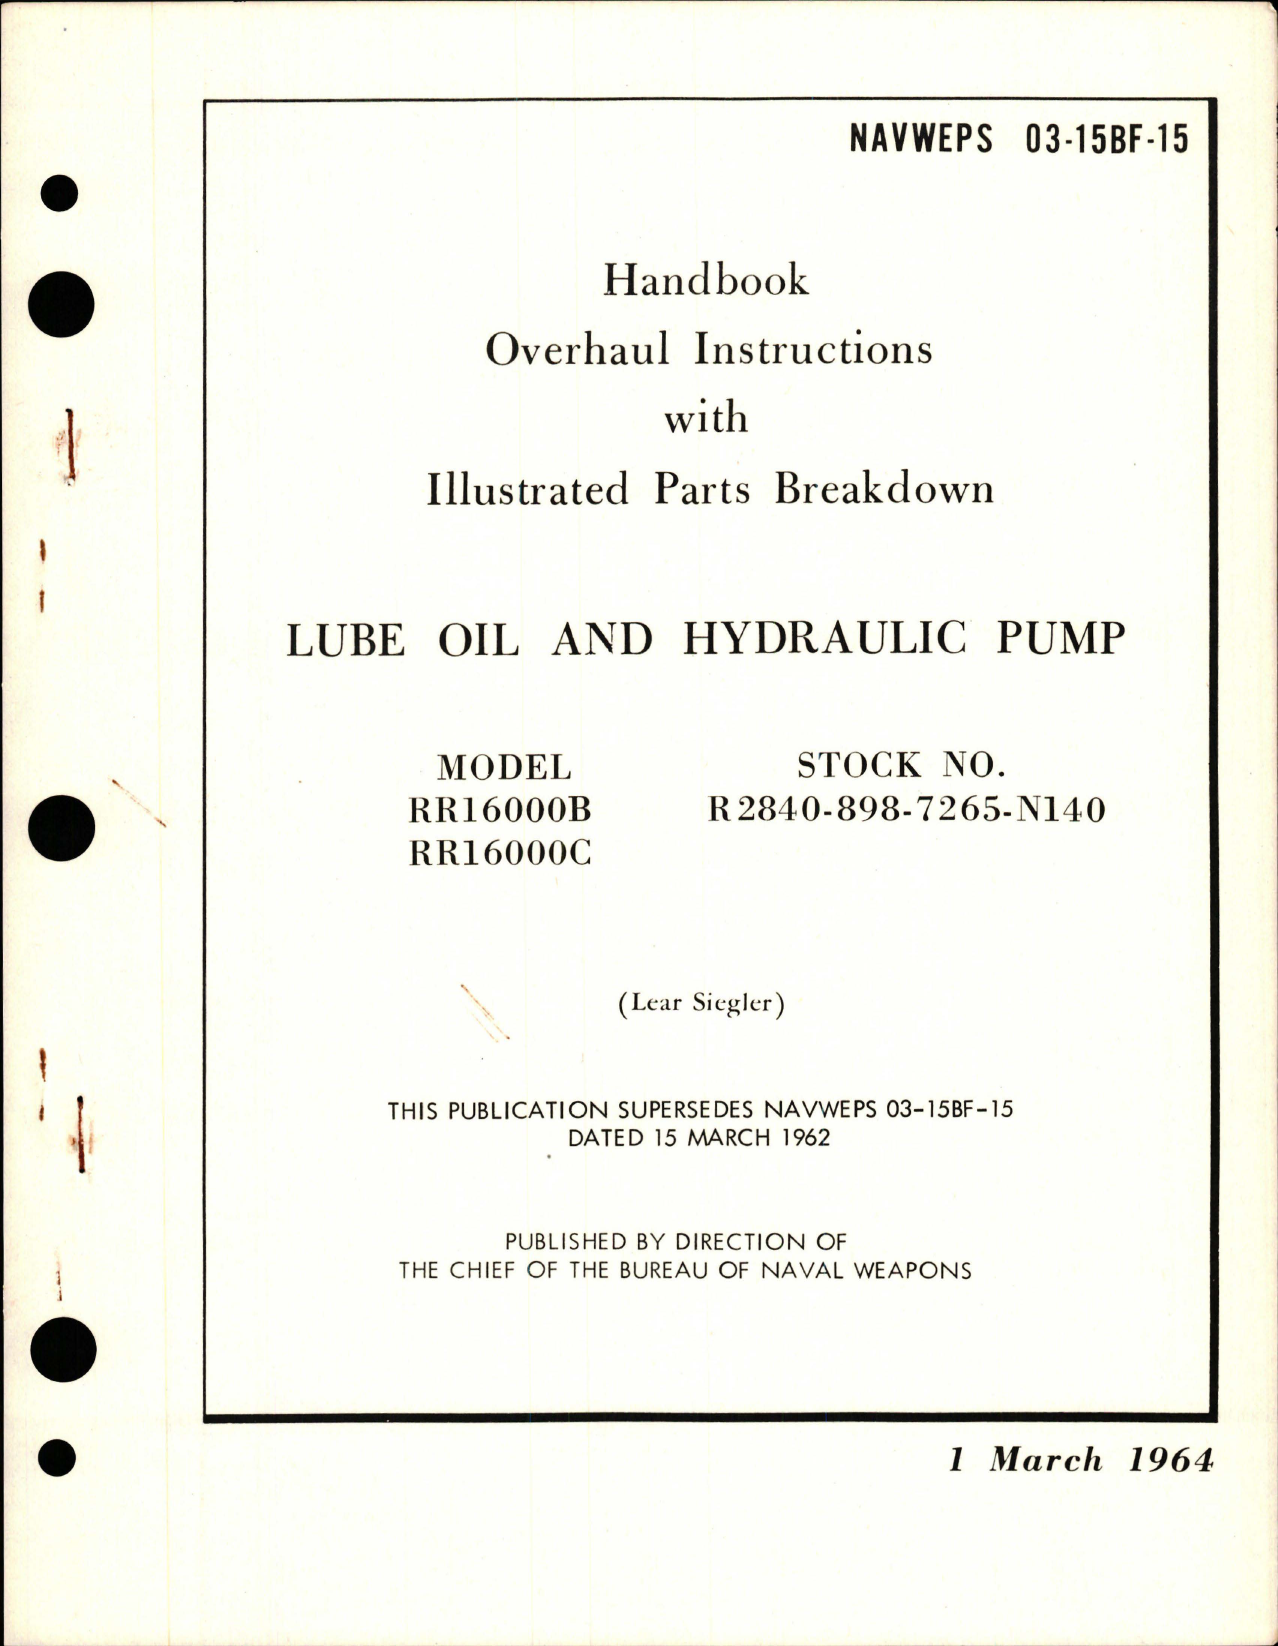 Sample page 1 from AirCorps Library document: Overhaul Instructions with Illustrated Parts for Lube Oil and Hydraulic Pump - Model RR16000B and RR16000C